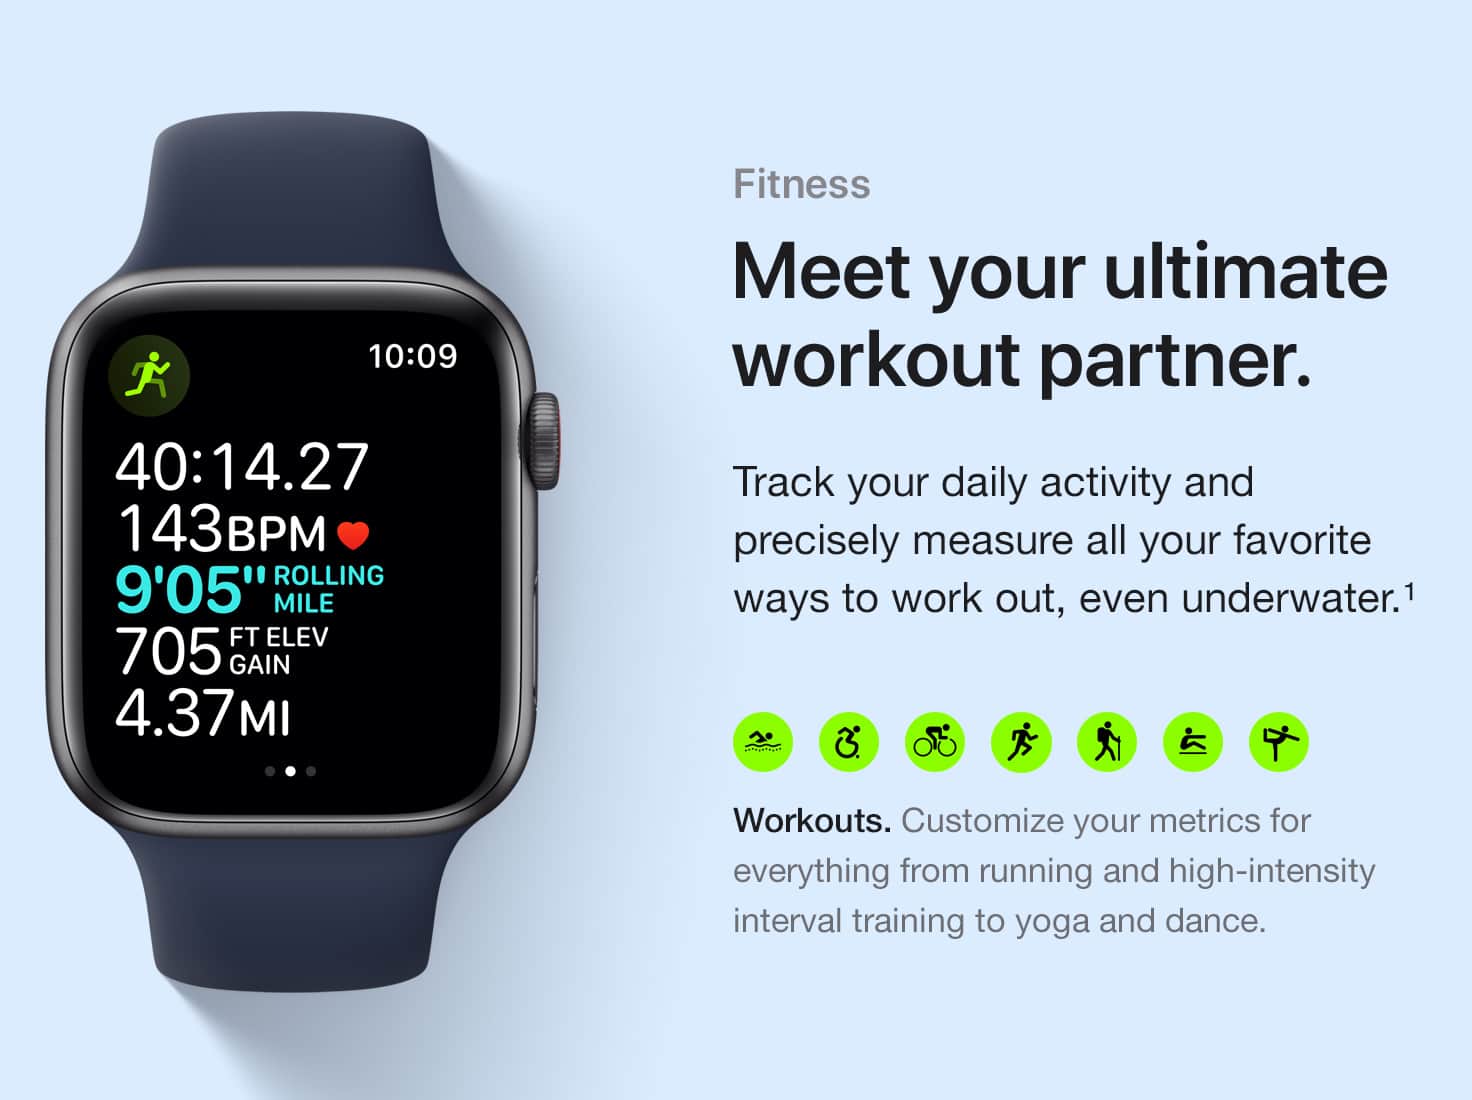 Fitness. Meet your ultimate workout partner. Track your daily activity and precisely measure all your favorite ways to work out, even underwater.(1) Workouts. Customize your metrics for everything from running and high-intensity interval training to yoga and dance.